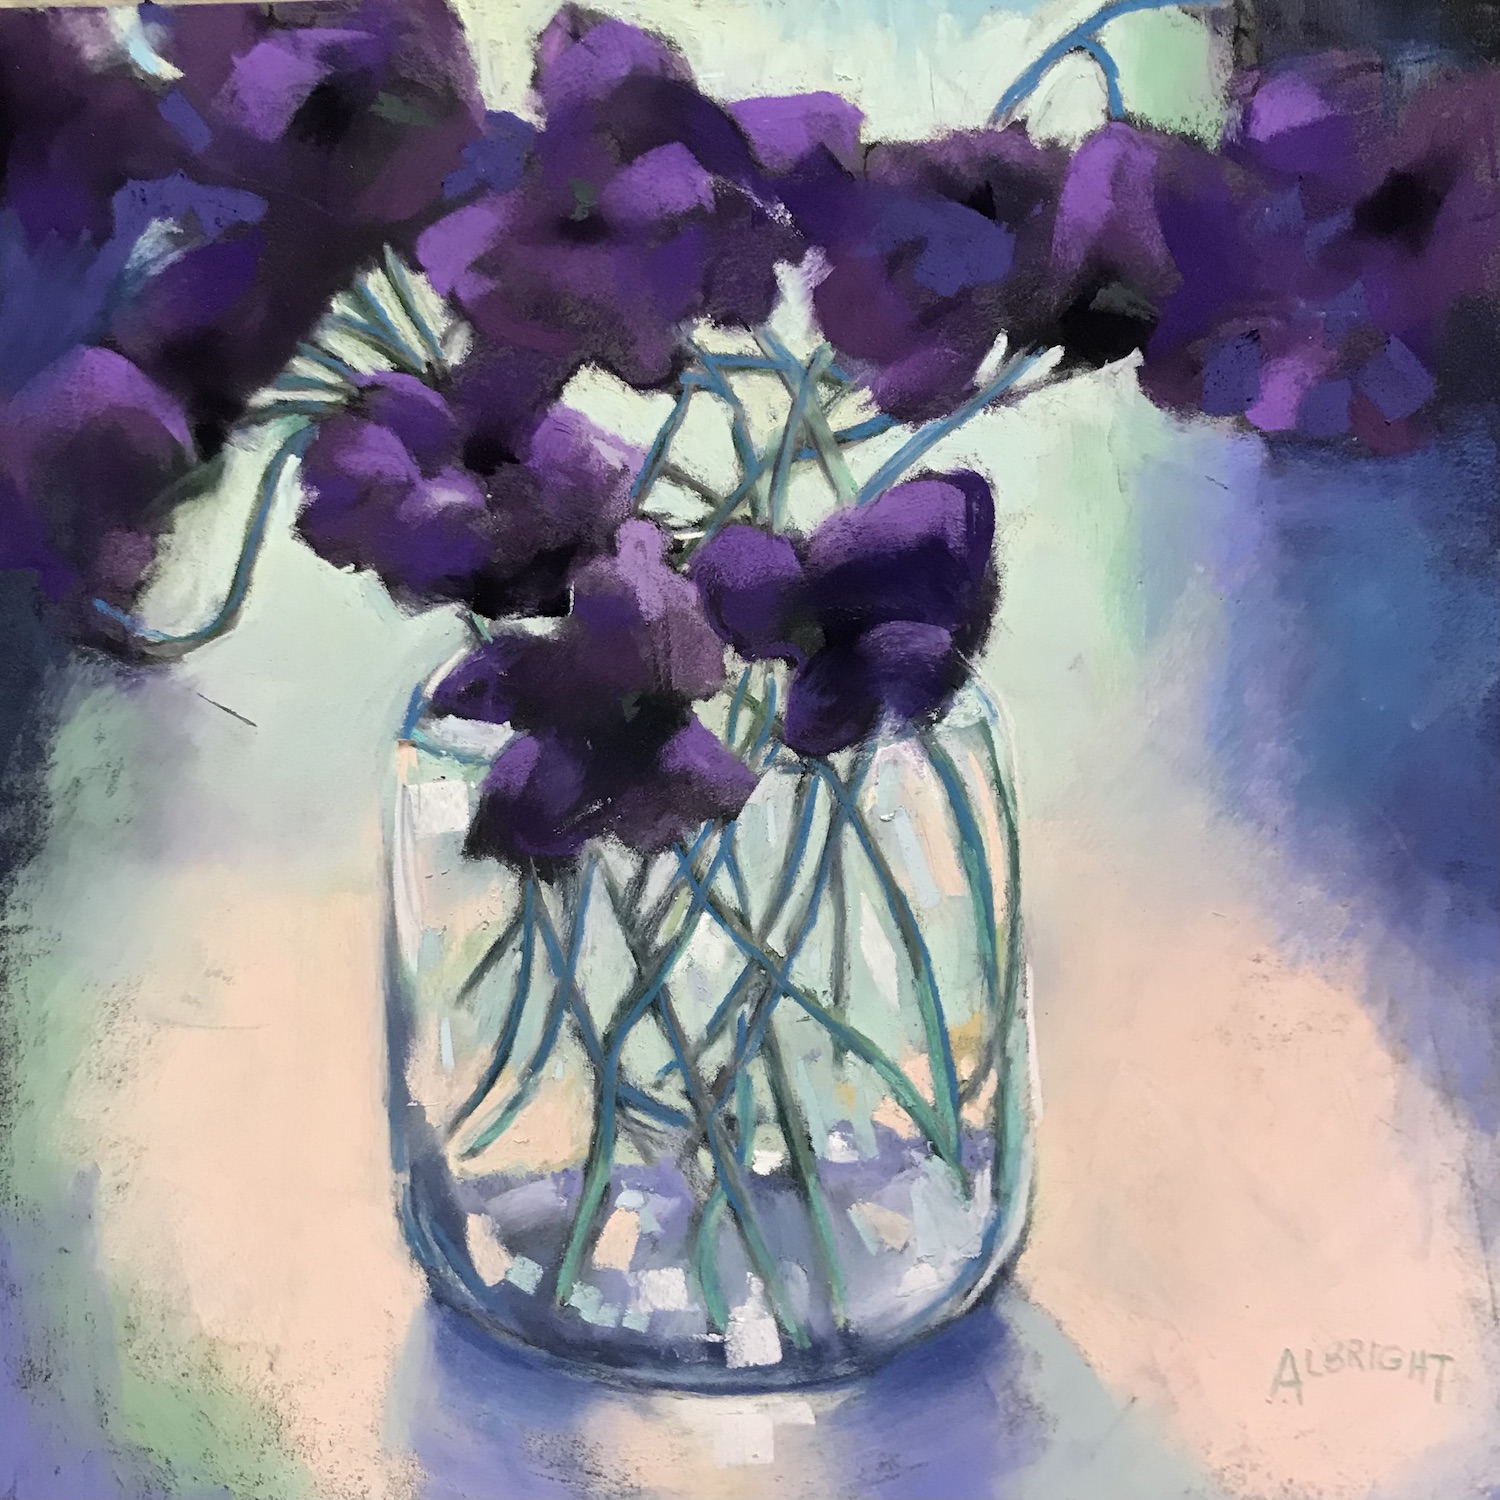 Albright,Judy-Tender Violets Greet the Day